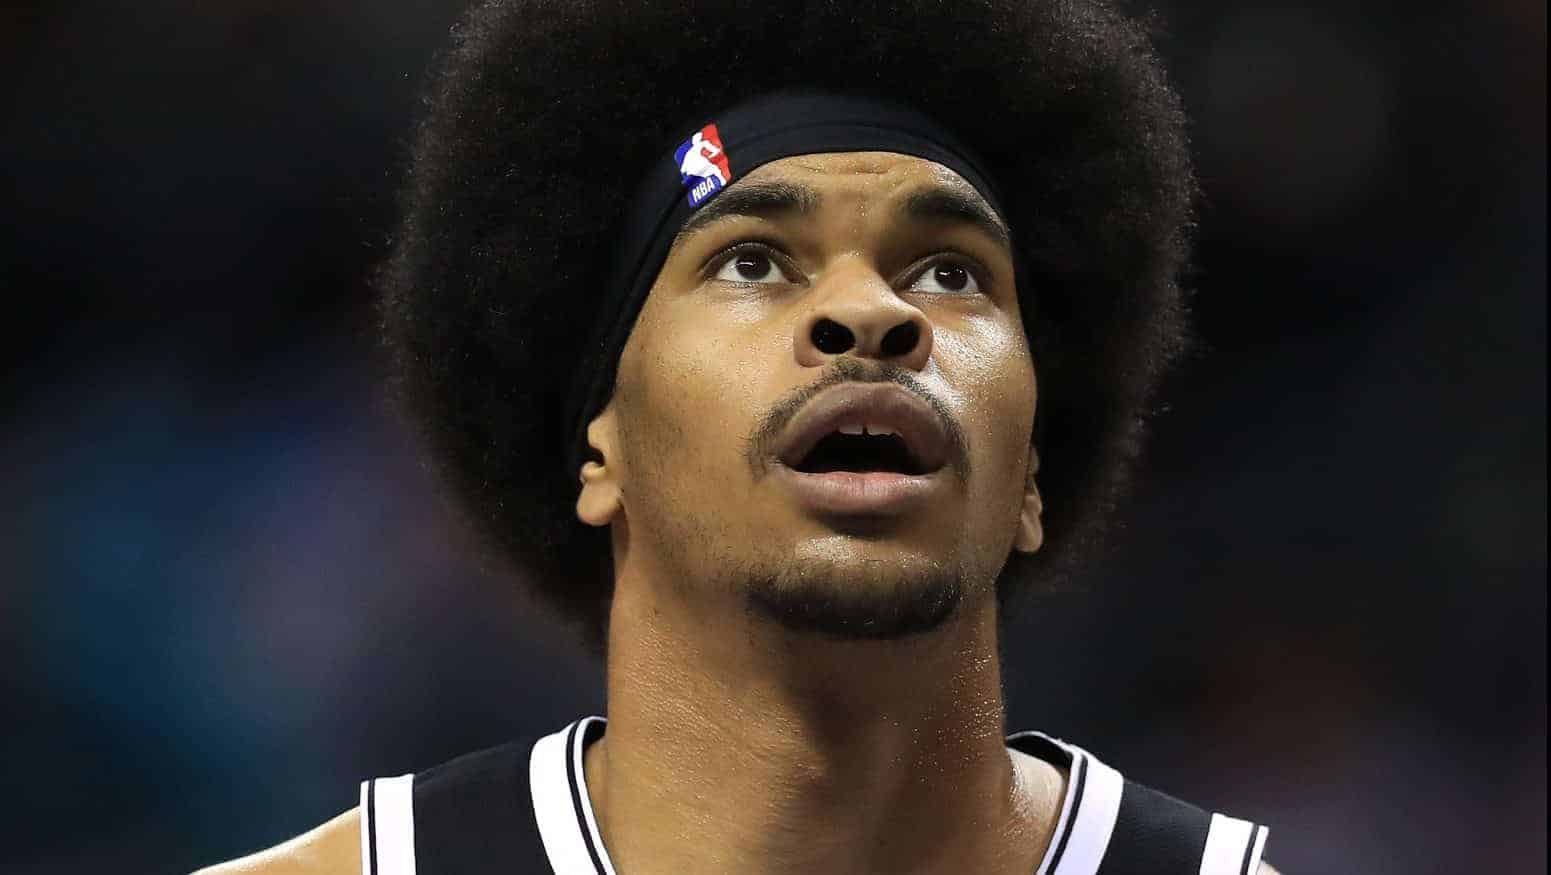 CHARLOTTE, NORTH CAROLINA - DECEMBER 06: Jarrett Allen #31 of the Brooklyn Nets watches on against the Charlotte Hornets during their game at Spectrum Center on December 06, 2019 in Charlotte, North Carolina.